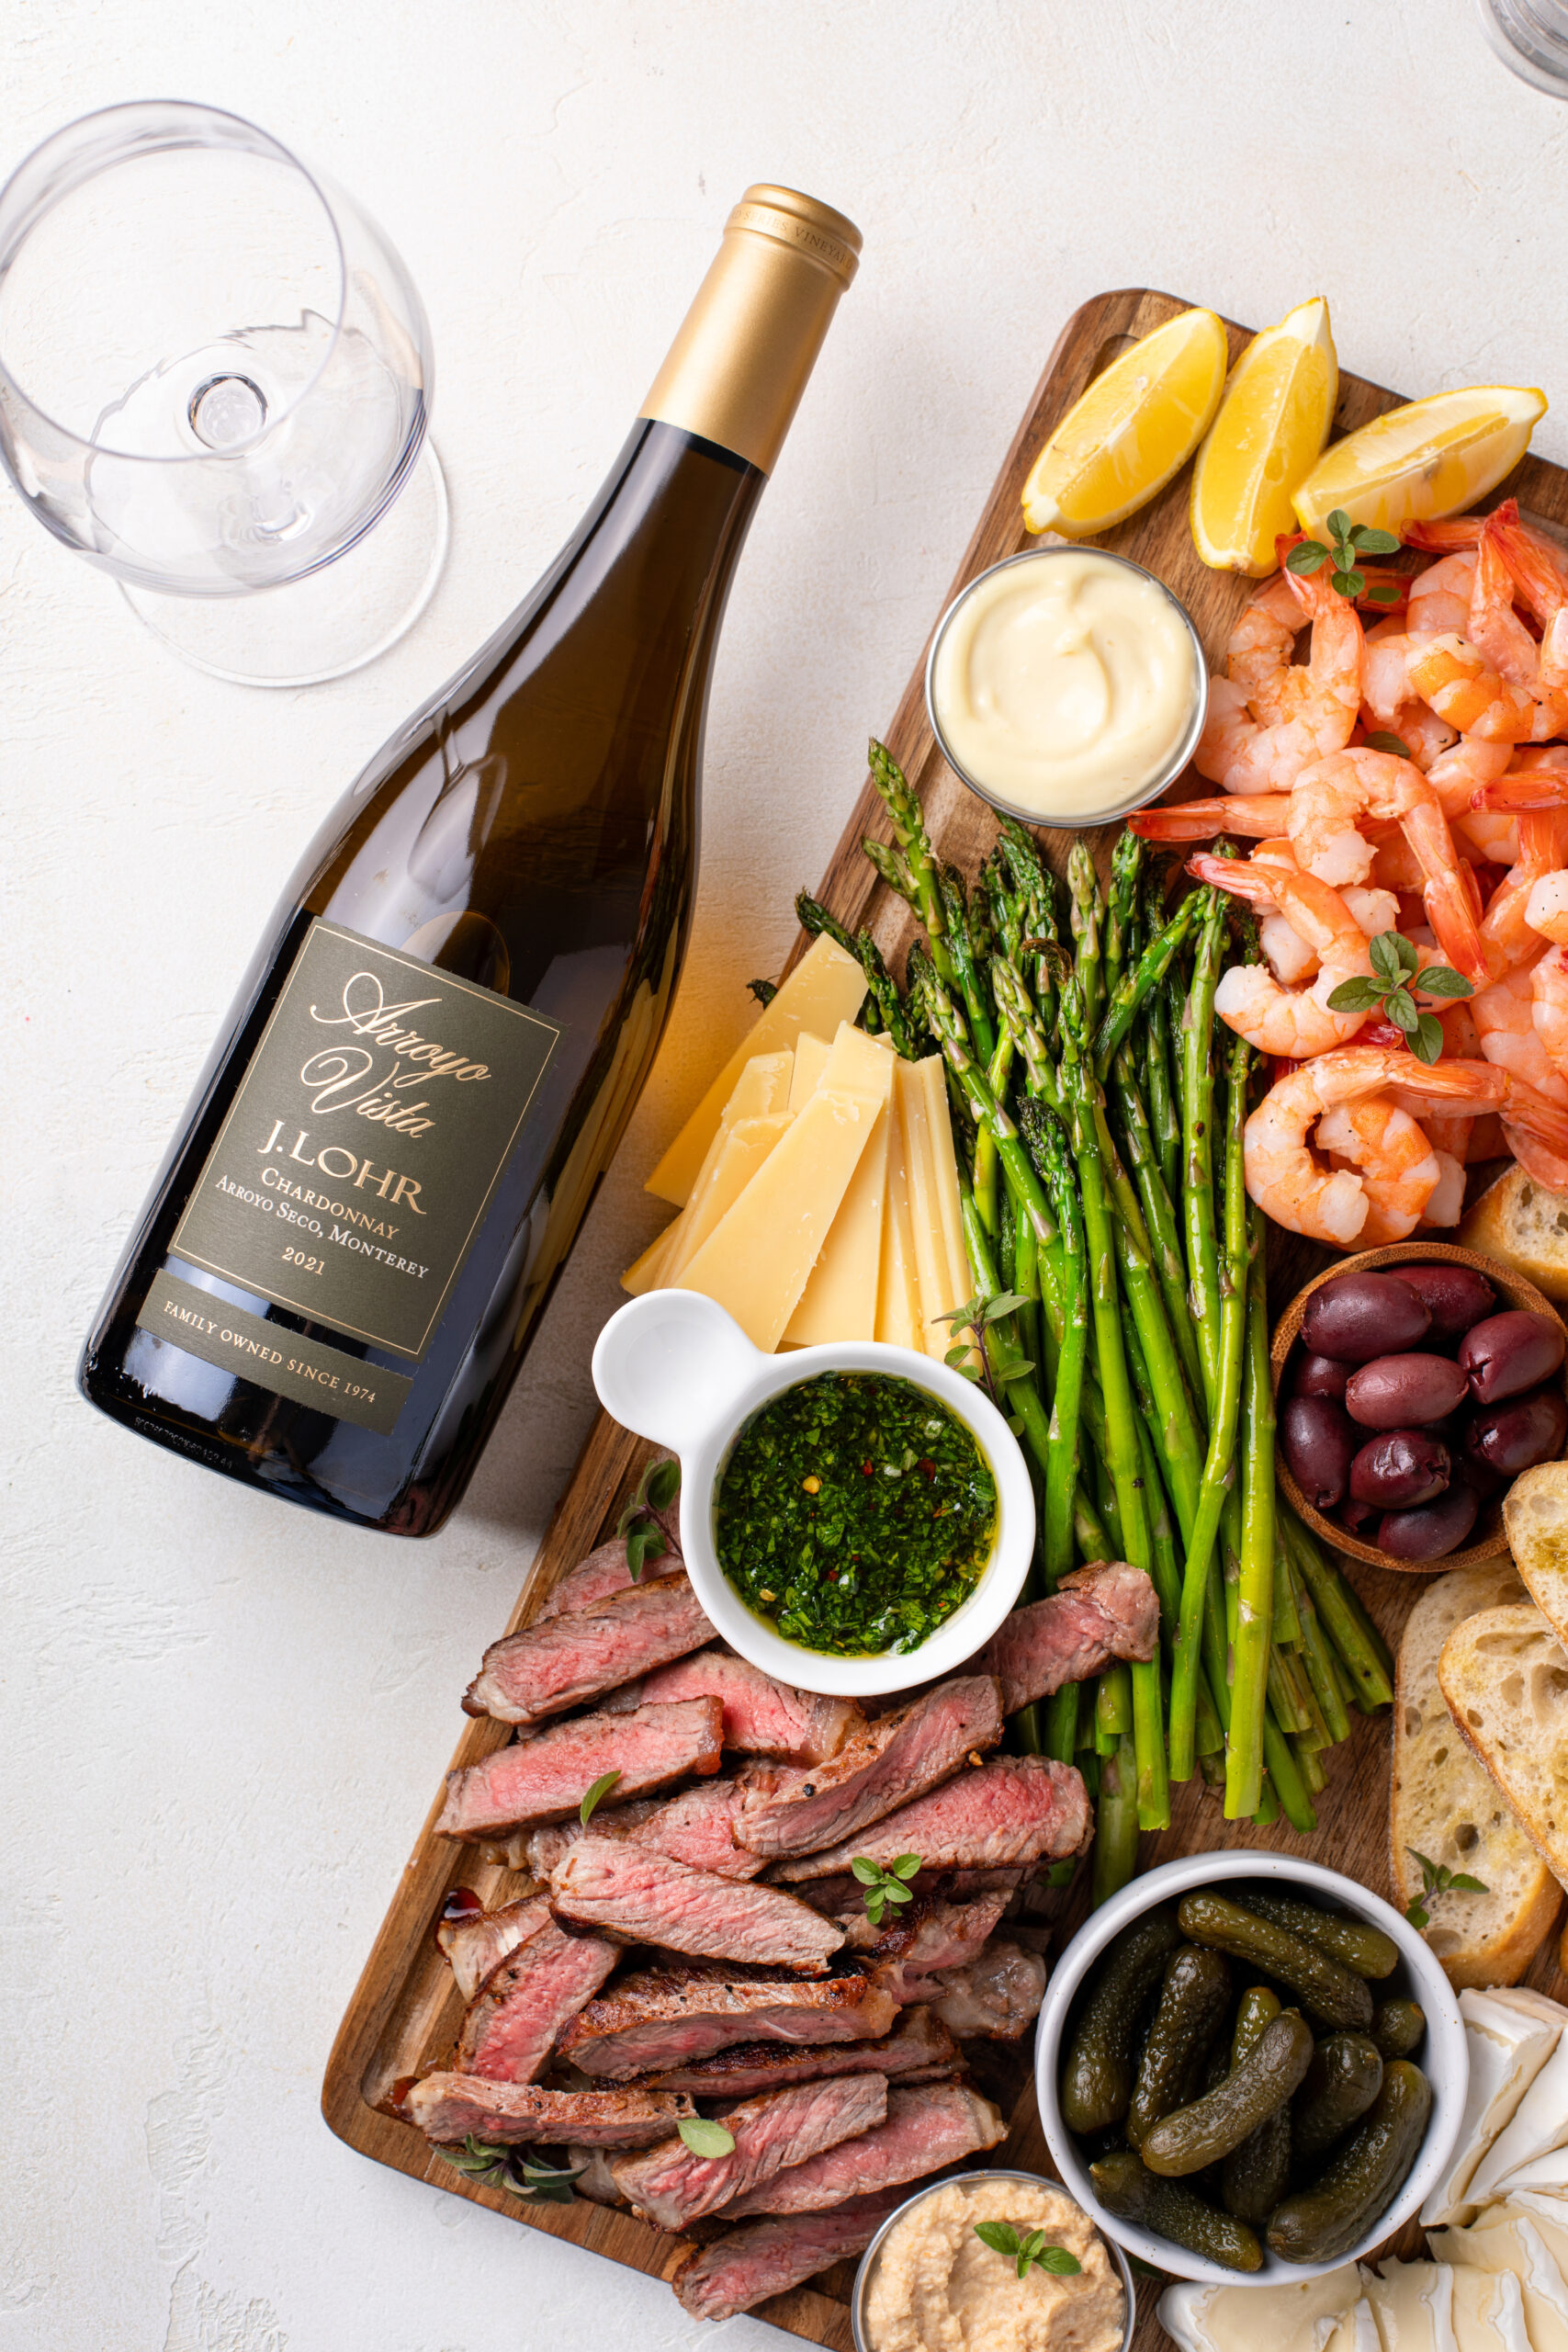 Looking to create the perfect surf & turf board for New Year's Eve? CLICK HERE to see what you need, and why you need to make a surf & turf board ASAP!